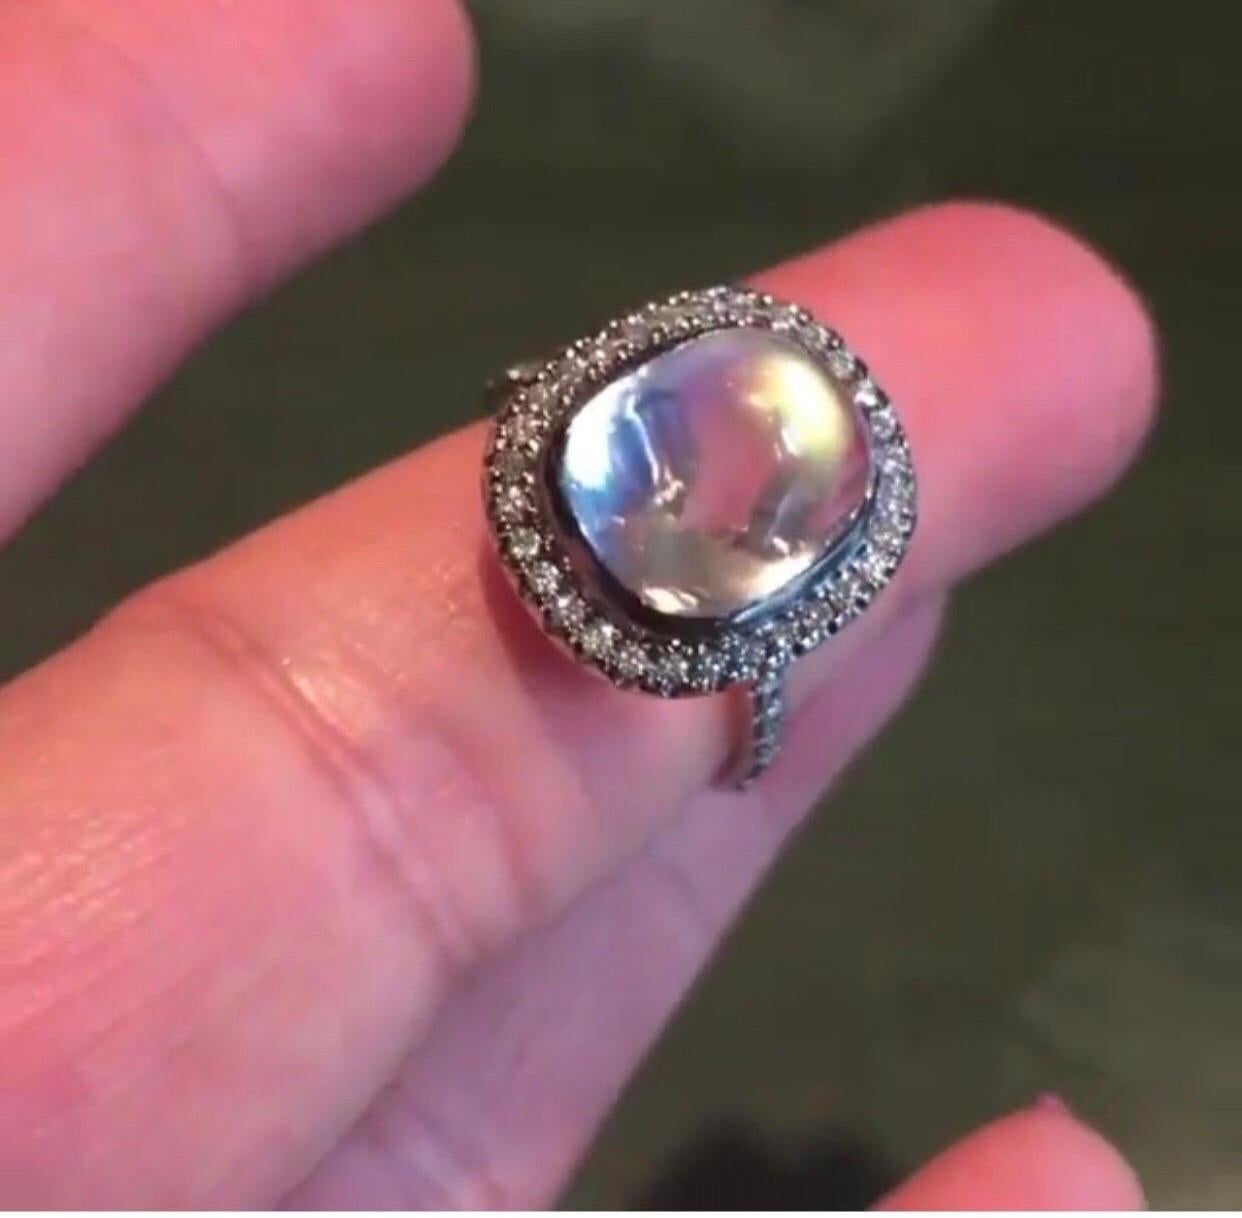 The  Statement Rainbow Moonstone Ring With Diamond Accent, Made with 18 K White Gold, And  Black Rhodium Plated. Moonstone Enhances Feminine Energy, Supporting Balance, Intuition And Good Judgment, Also Protects Travelers On Their  Journeys. The